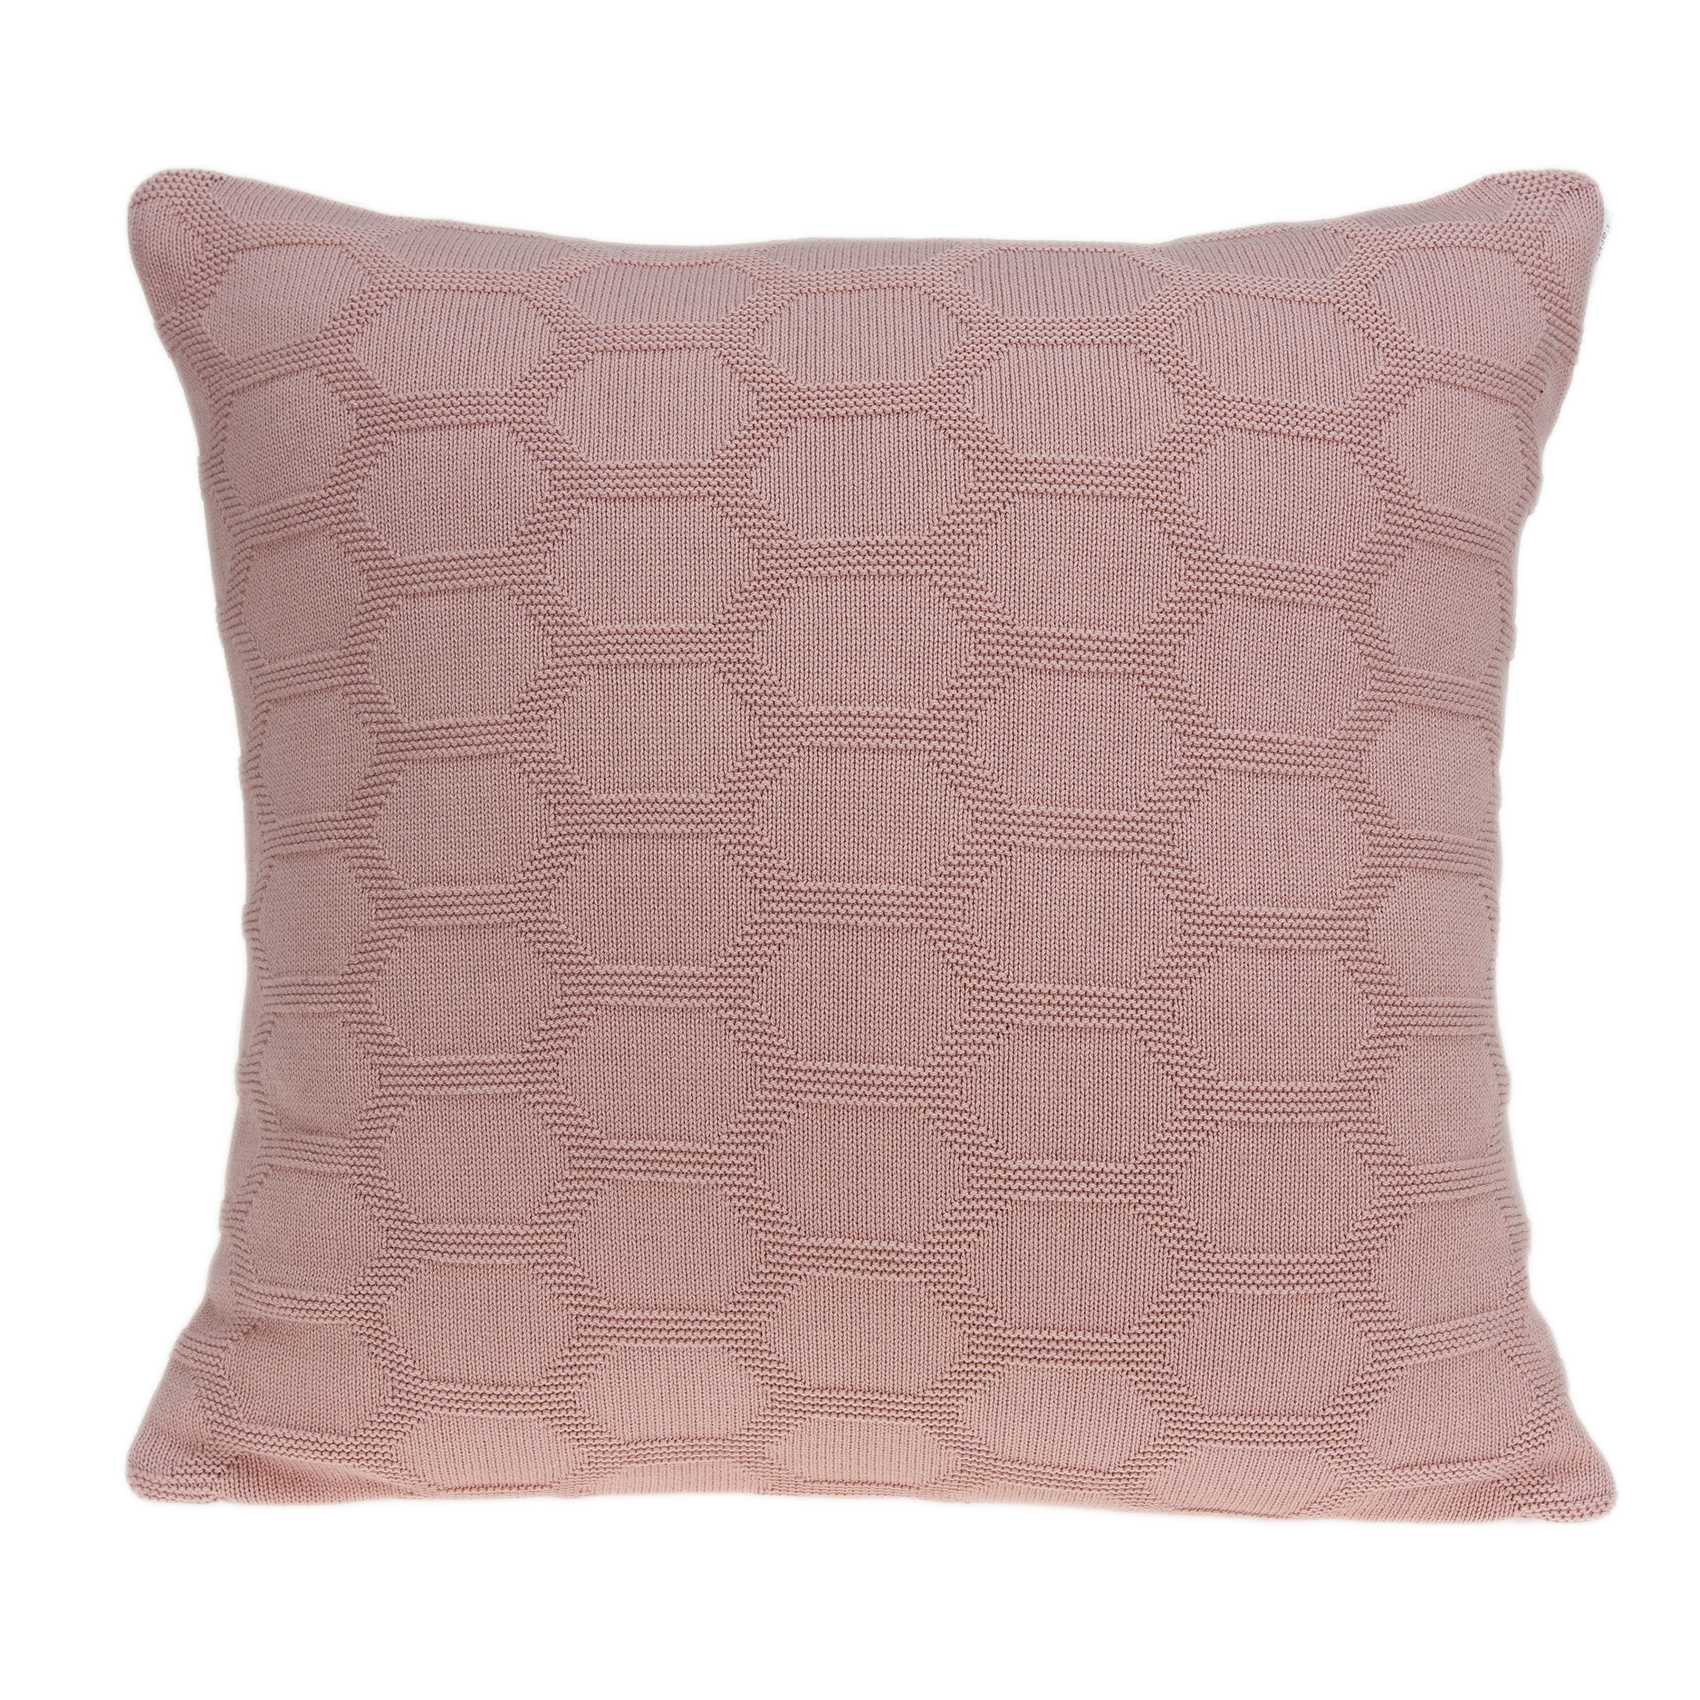 20" x 0.5" x 20" Transitional Pink Cotton Pillow Cover